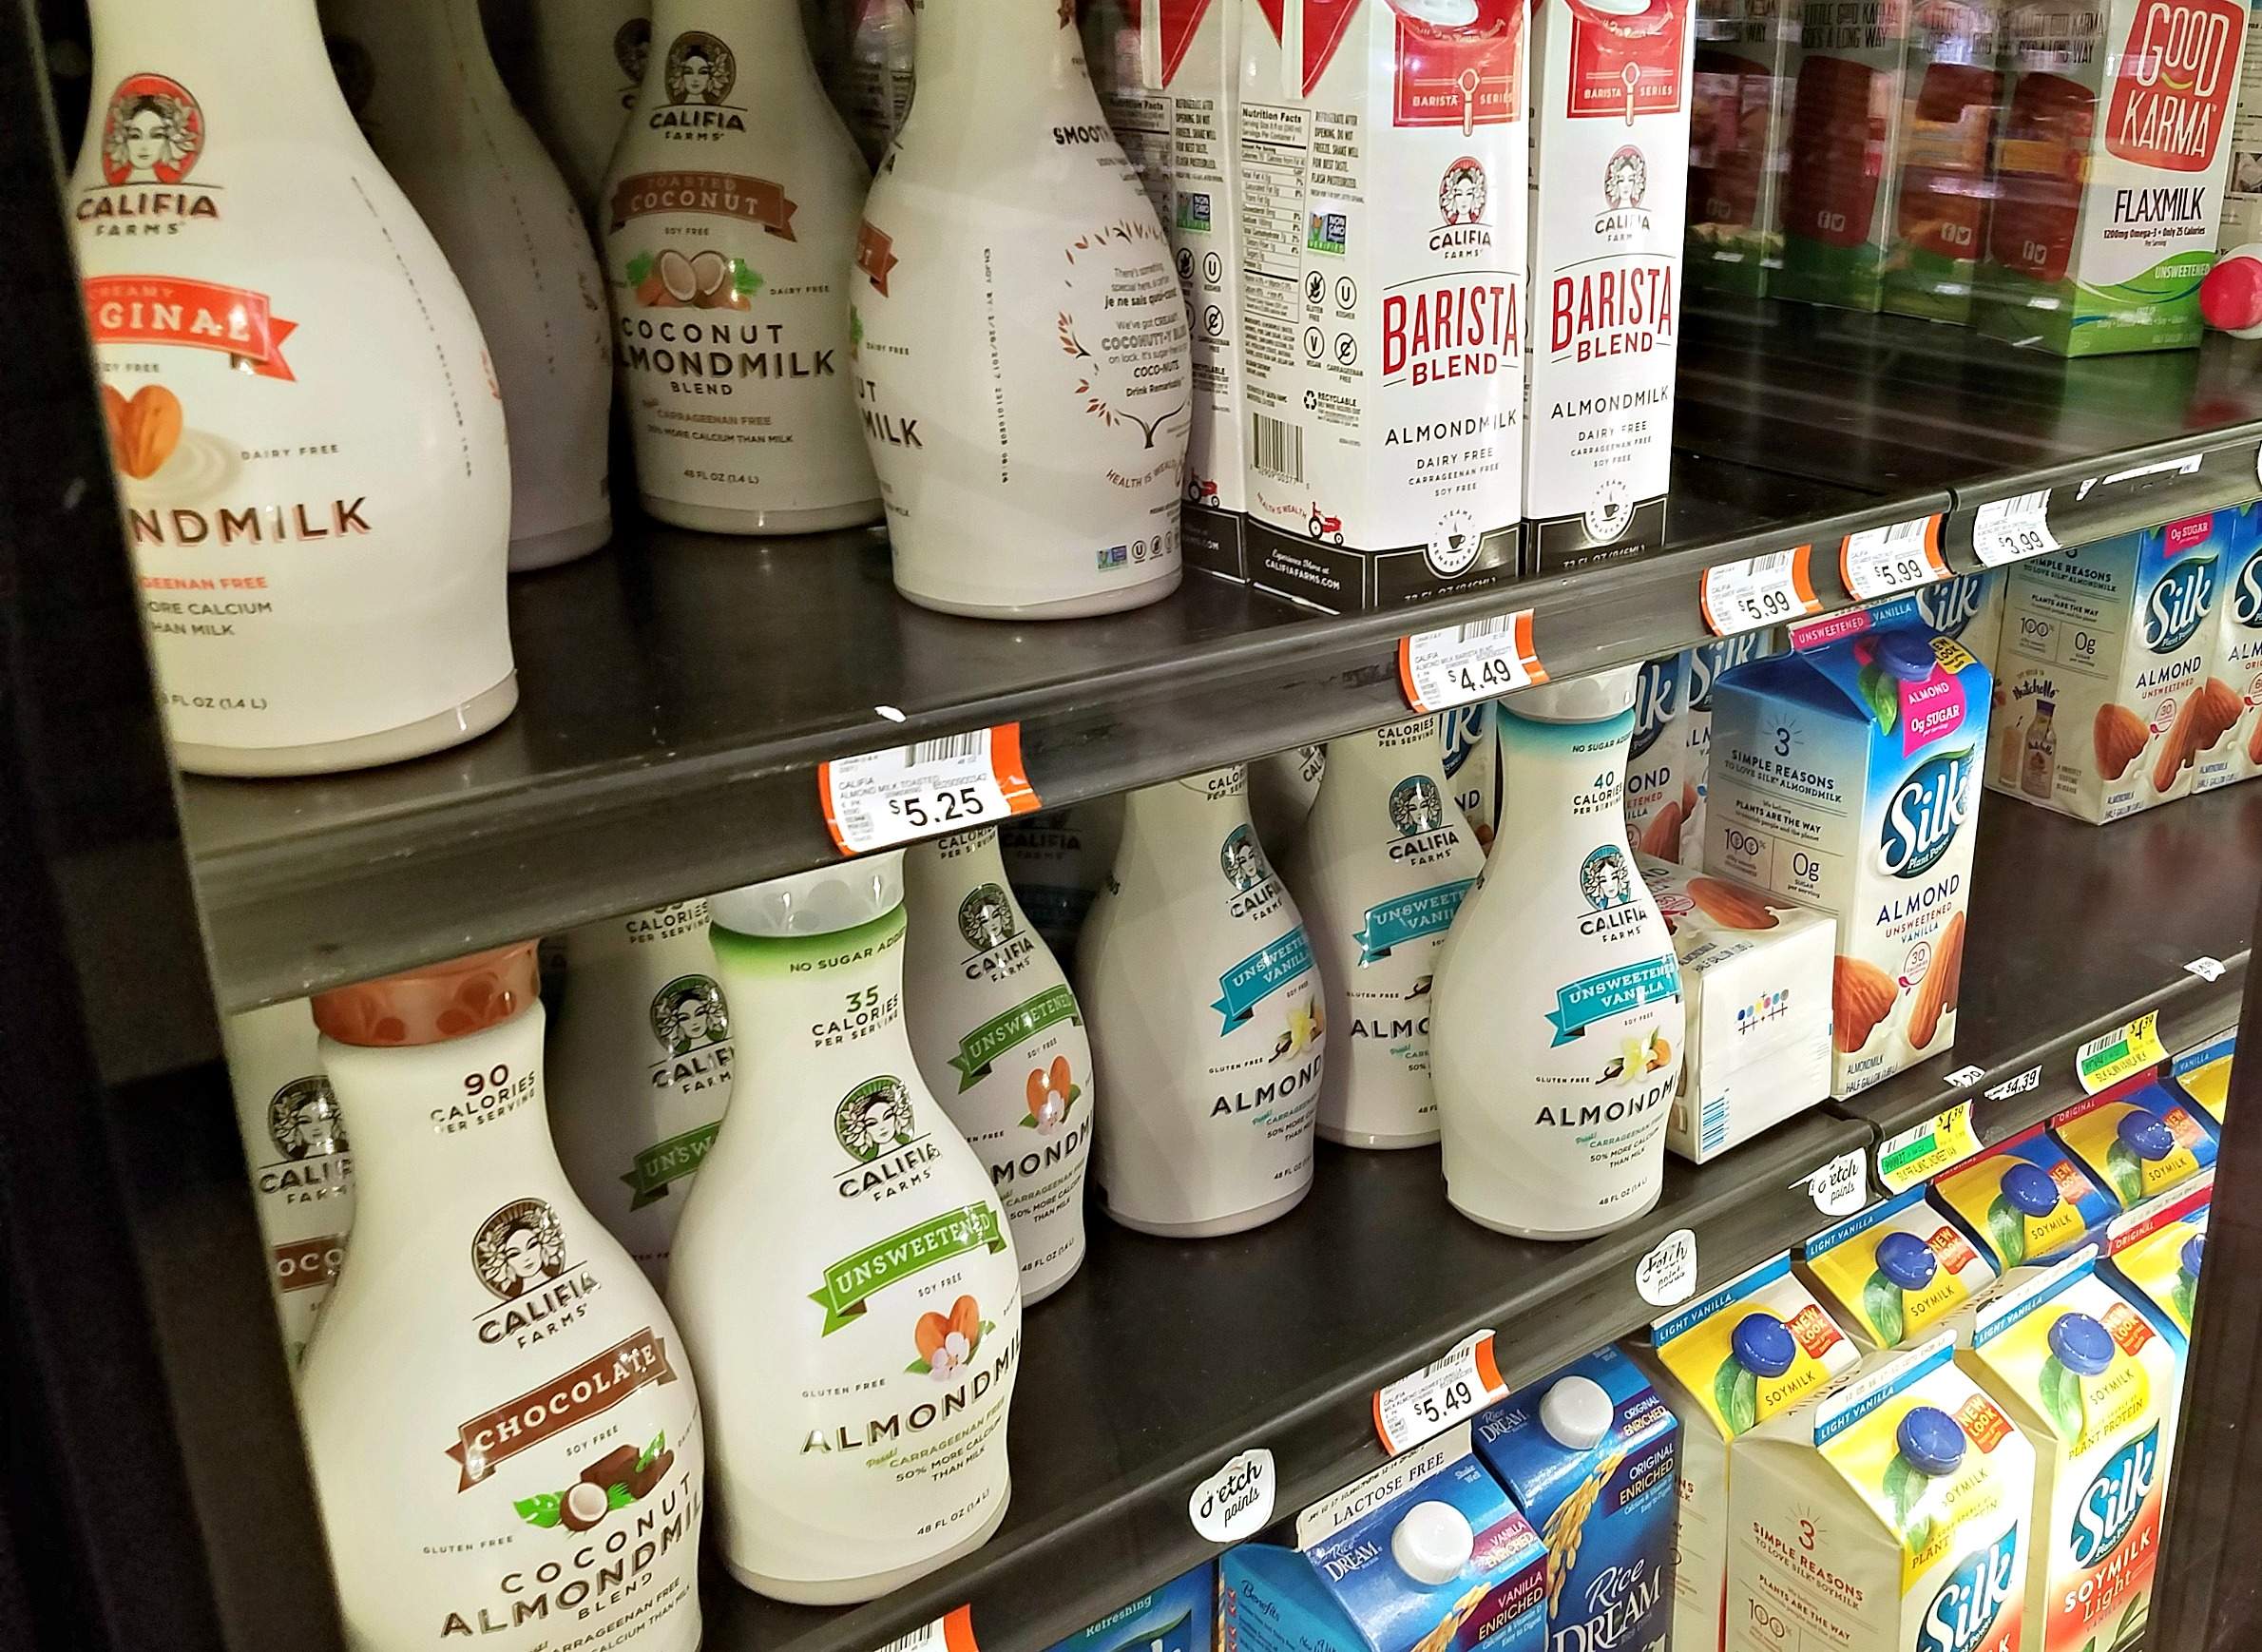 Sales of nut-based milks and related products are increasing.